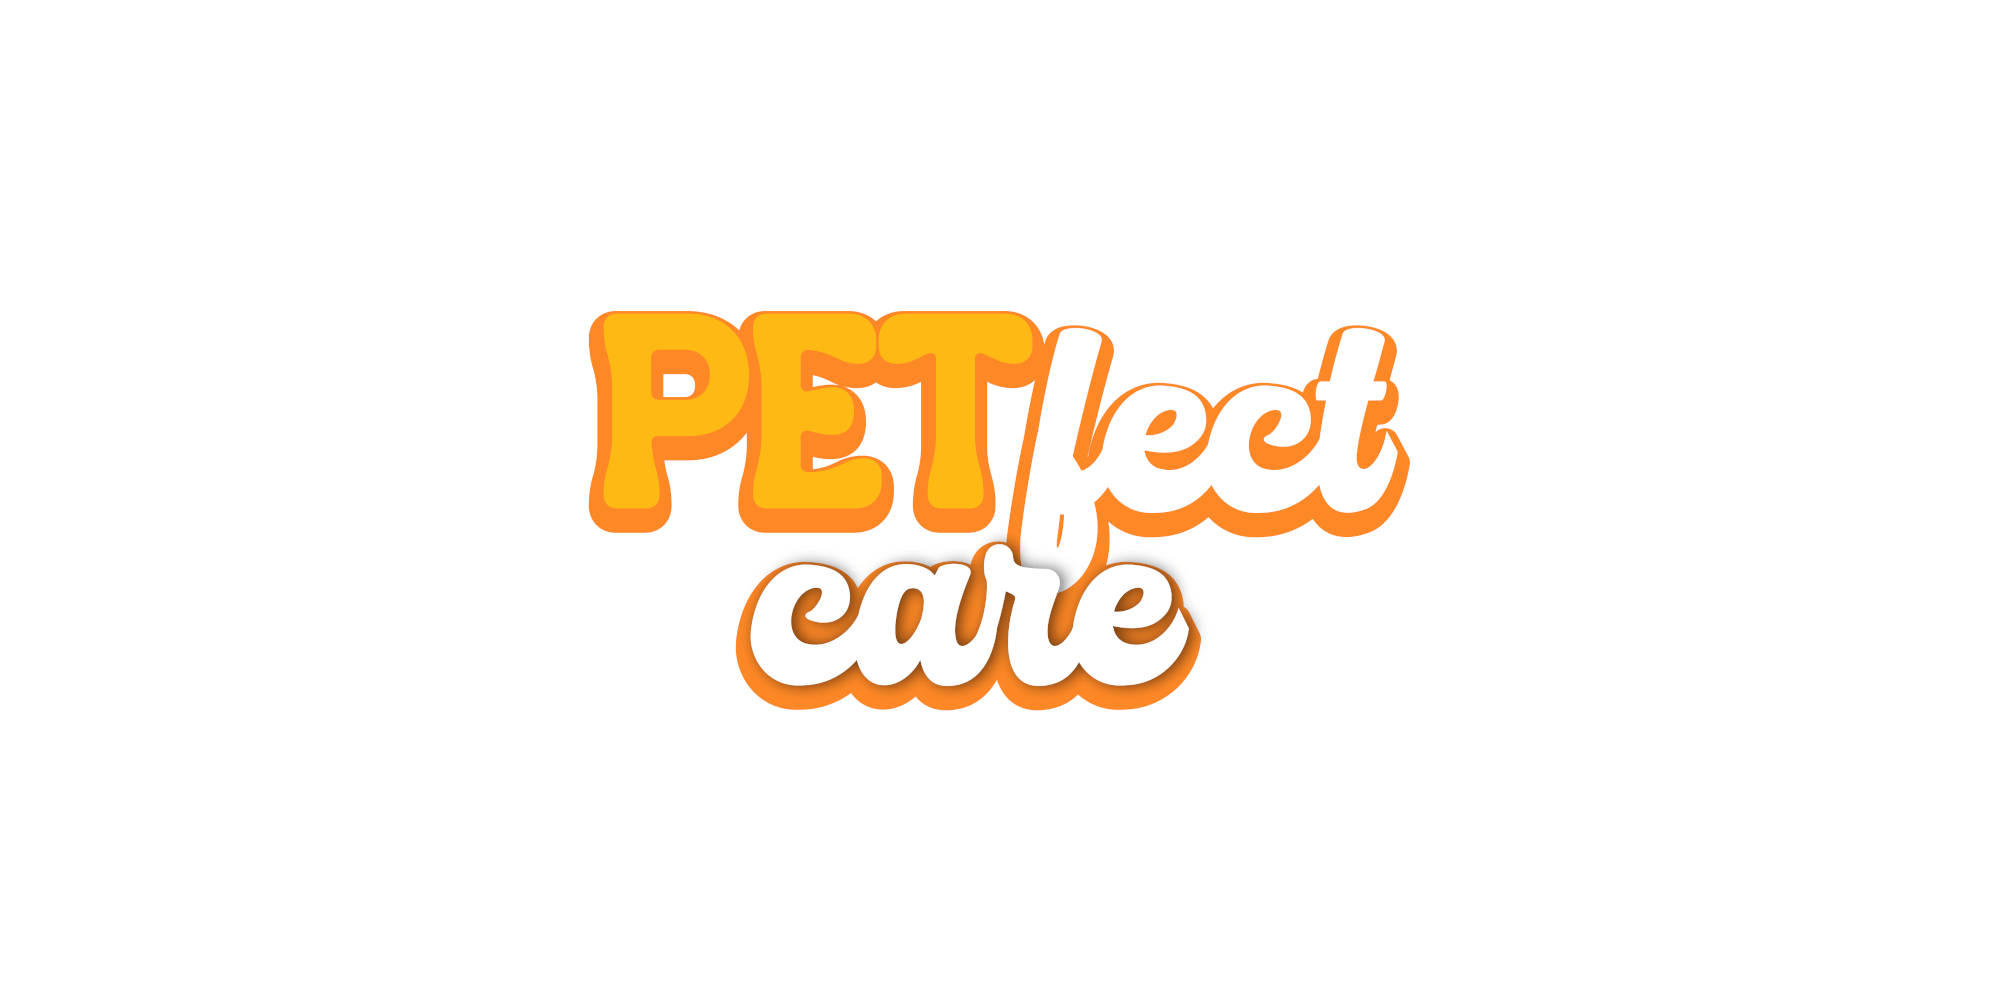 petfect-care-logo-summary.png